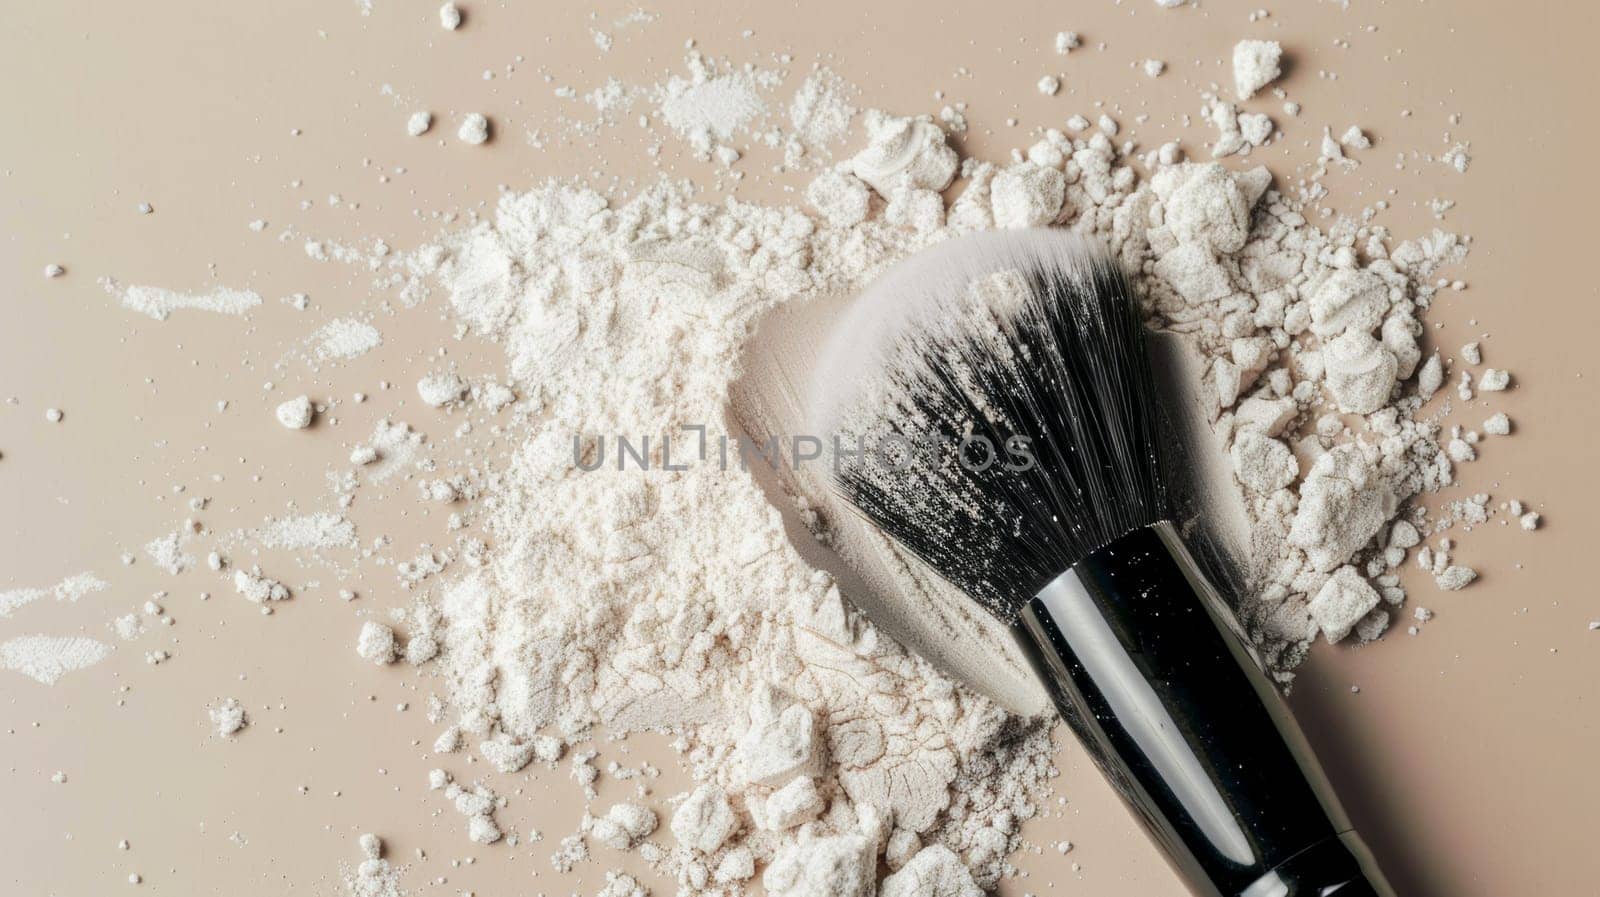 Close up of a makeup brush and powder explosion on a beige background.